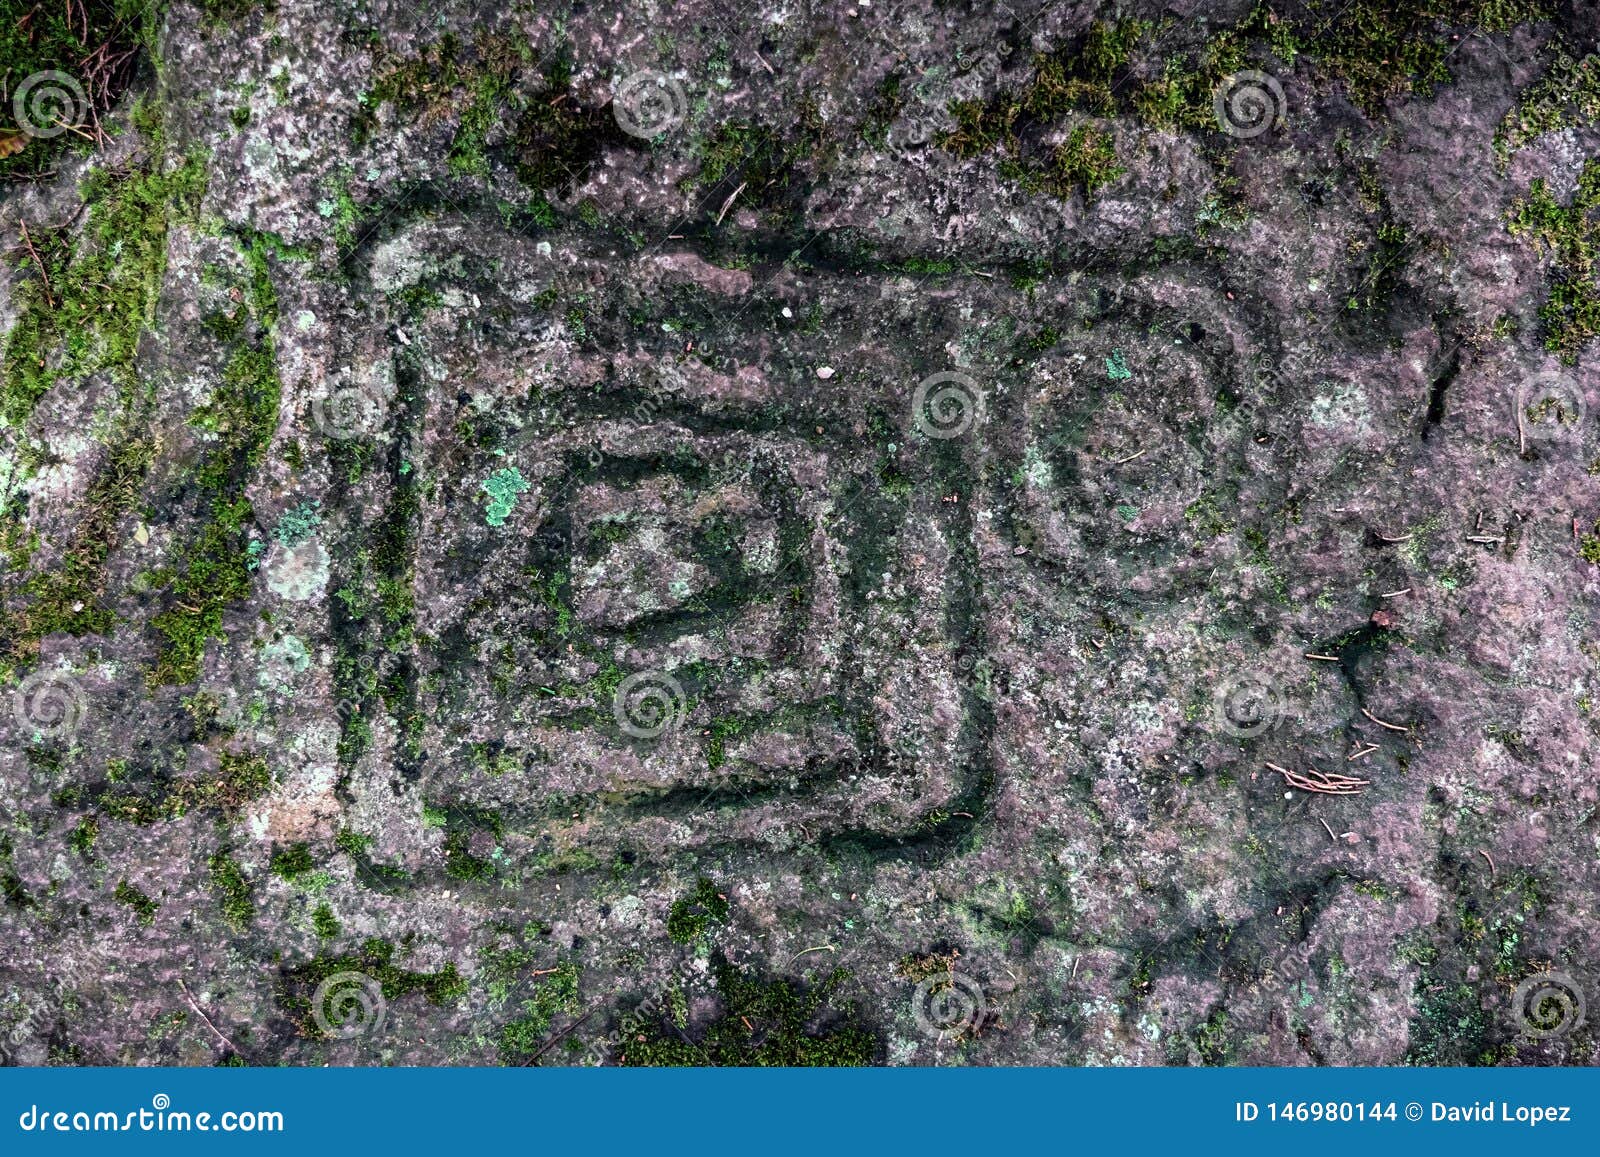 ancient petroglyphs carved by the carib tribes a